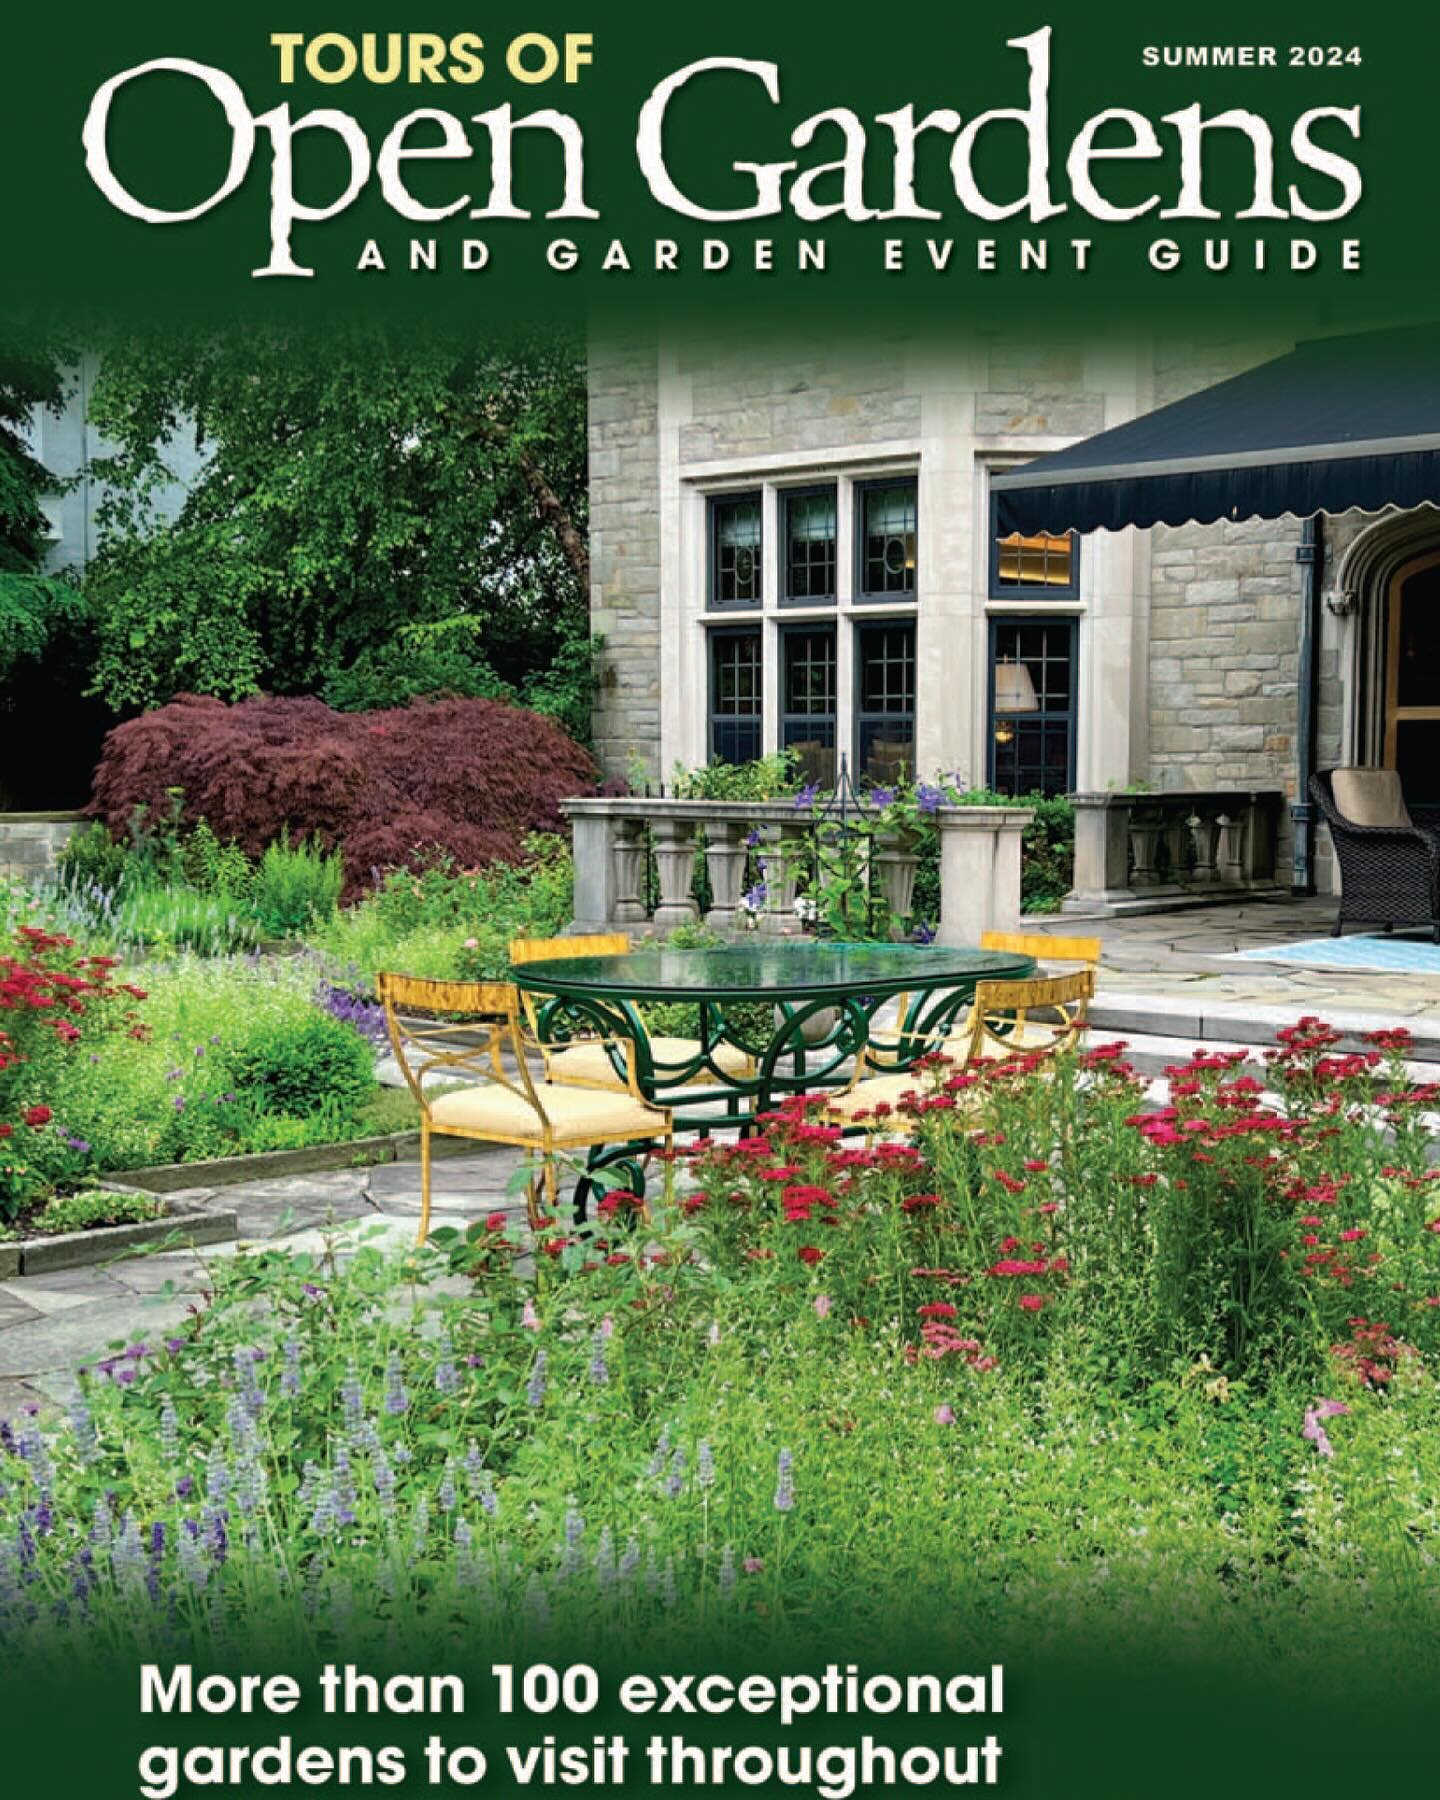 Pre-order your 2024 Open Gardens Guide at www.OpenGardensWNY.com . Your passport to over 100 exceptional gardens this July. (Cover photo: Forman Mansion Garden on Oakland Place)